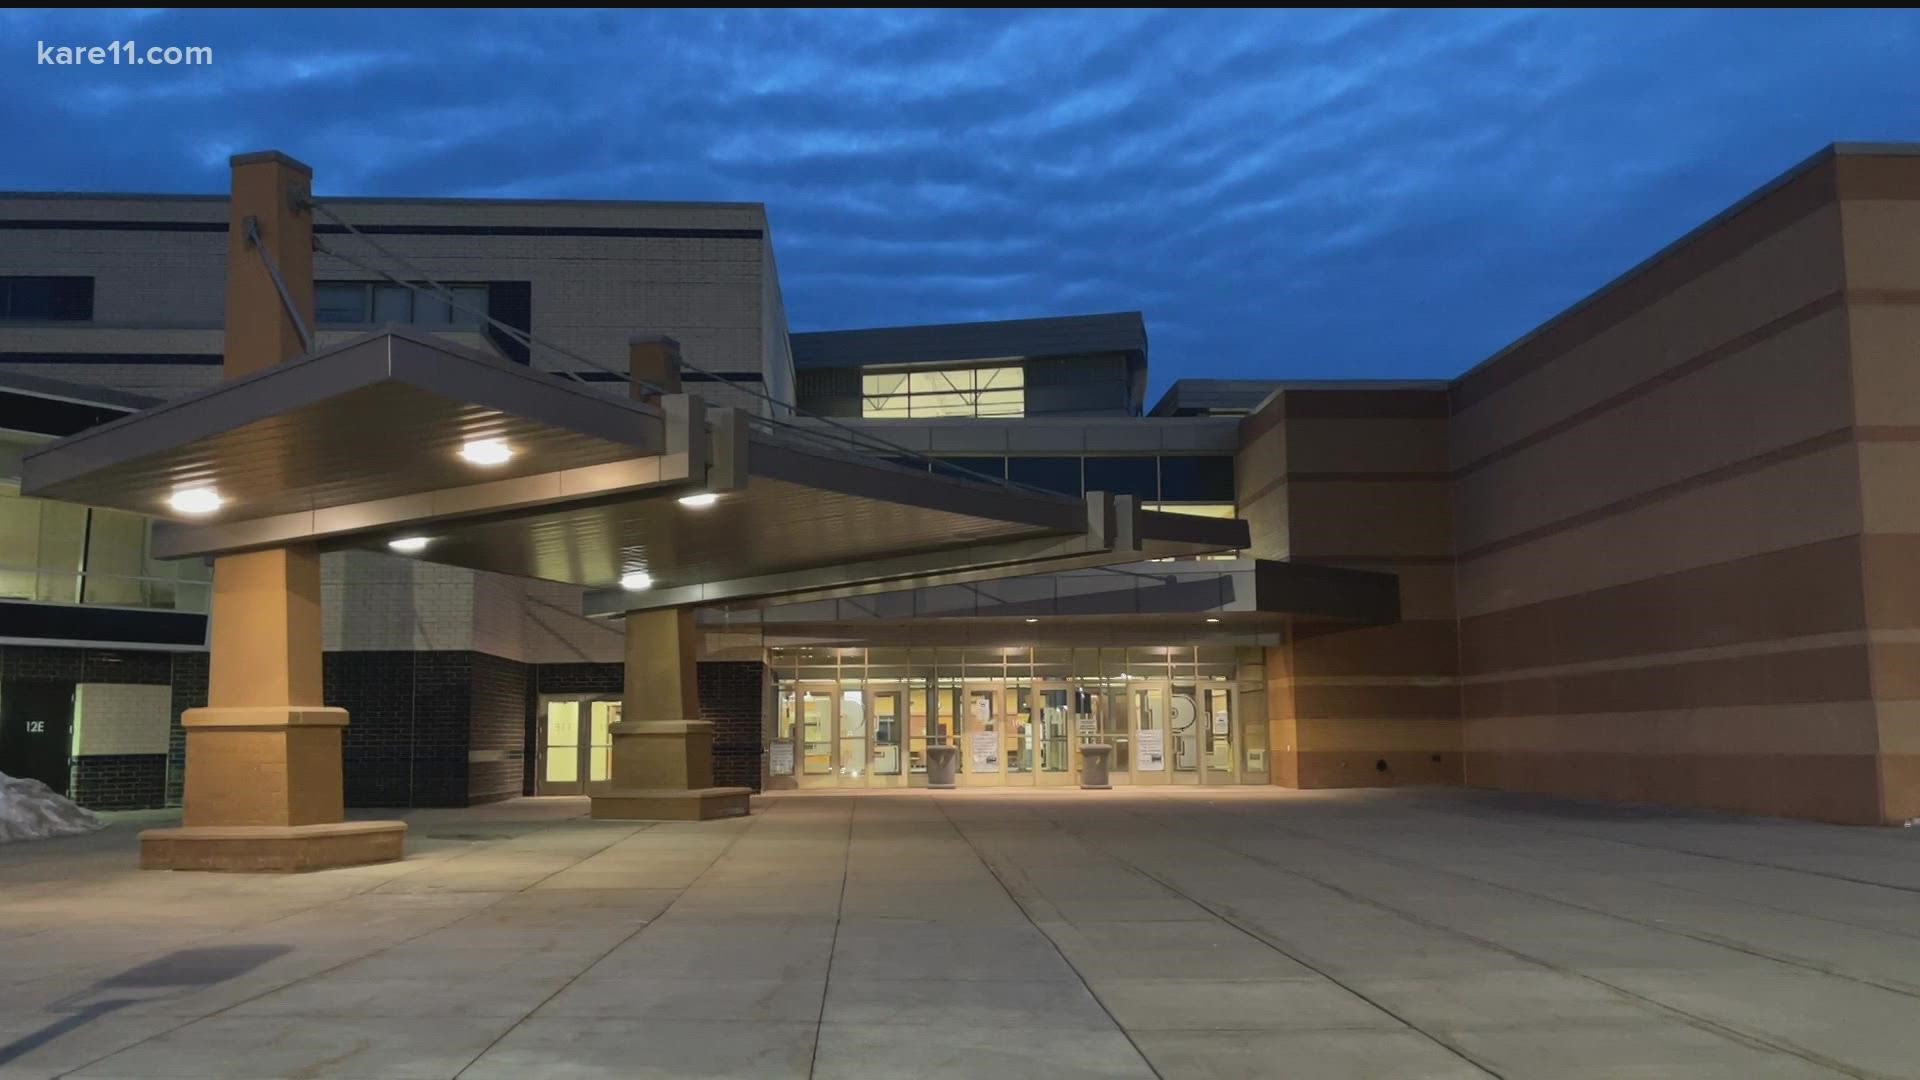 The principal at Prior Lake High School says they've hired an outside firm to immediately start investigating these recent incidents.